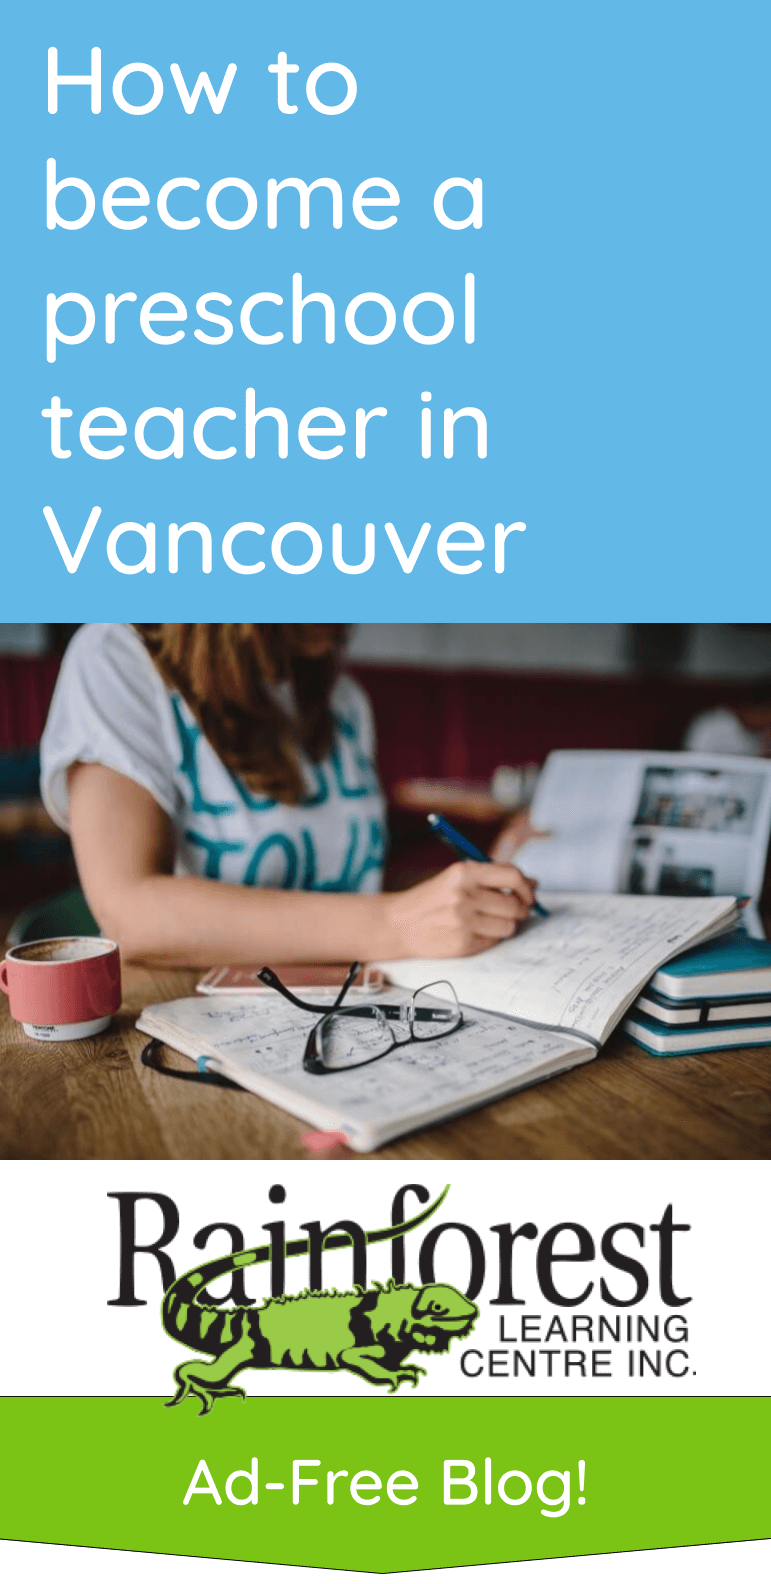 How to become a preschool teacher in Vancouver - article pinterest image